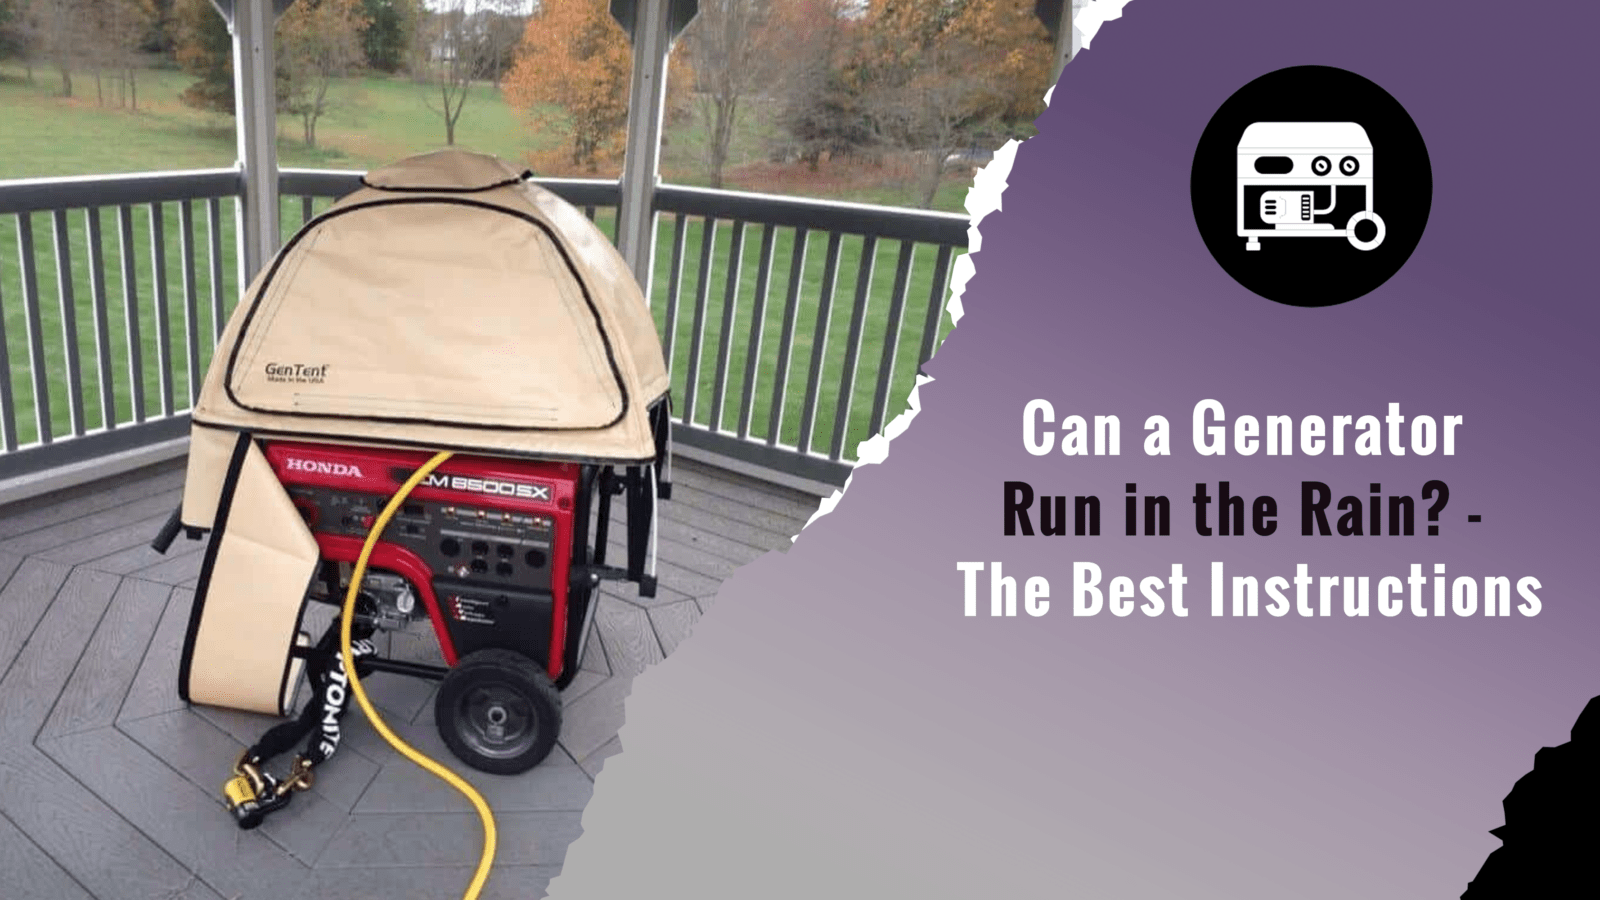 Can a Generator Run in the Rain - The Best Instructions